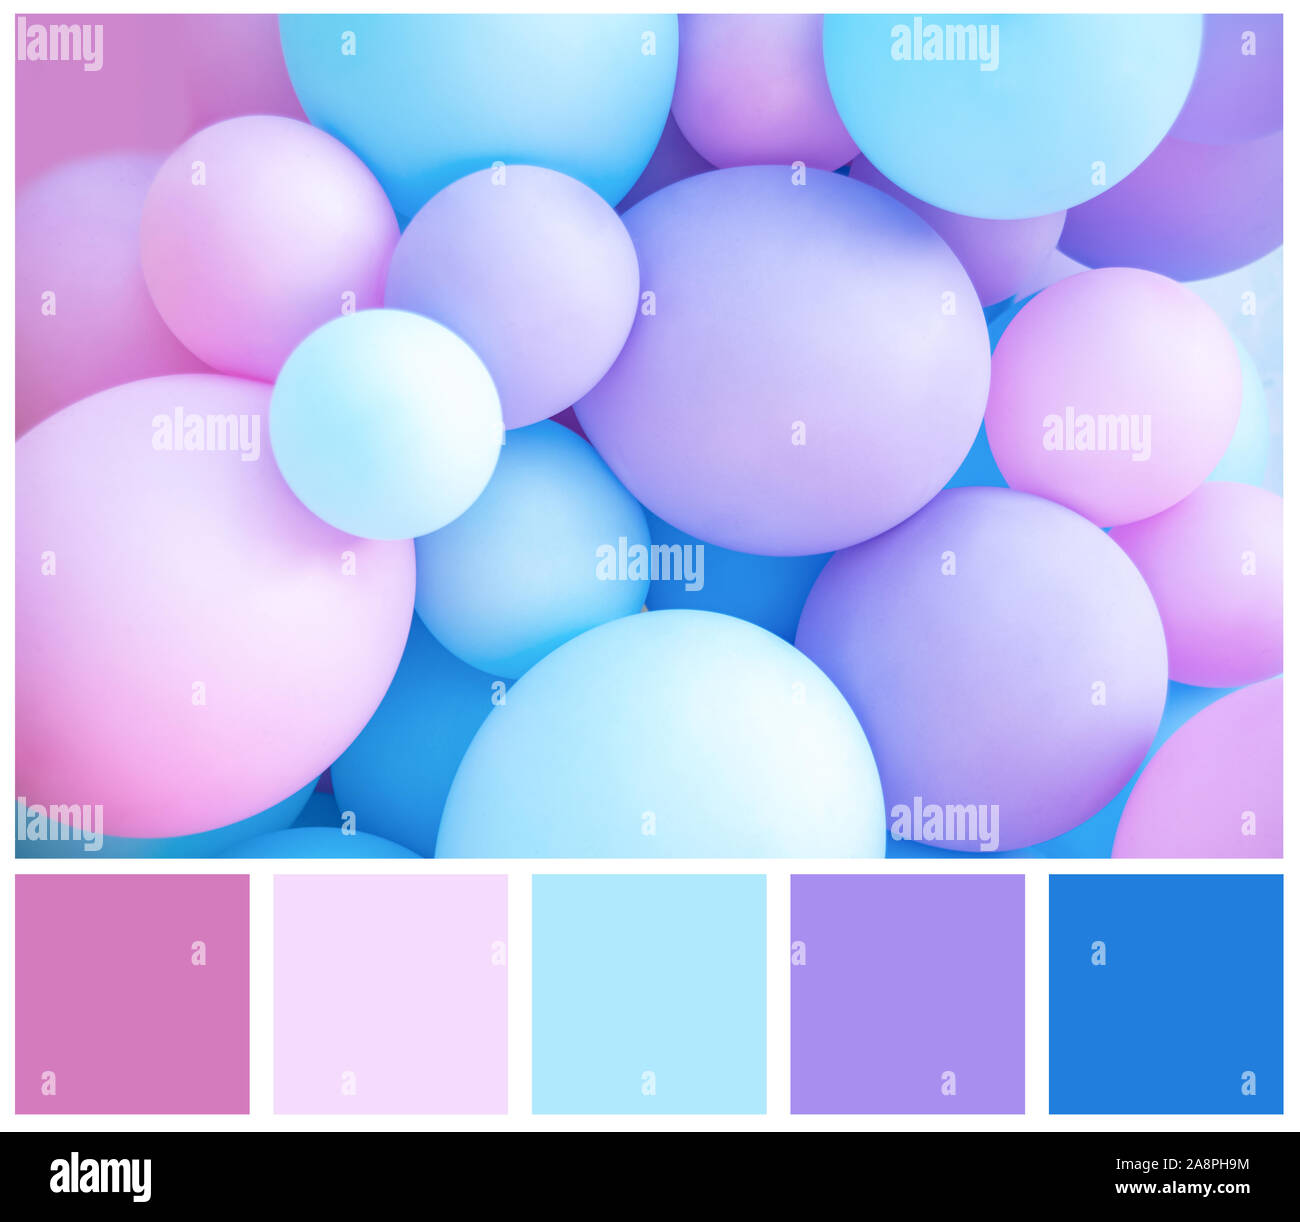 Colorful balloons background, punchy pastel colored and soft focus. pink  and mint balloons photo wall birthday decoration Stock Photo - Alamy